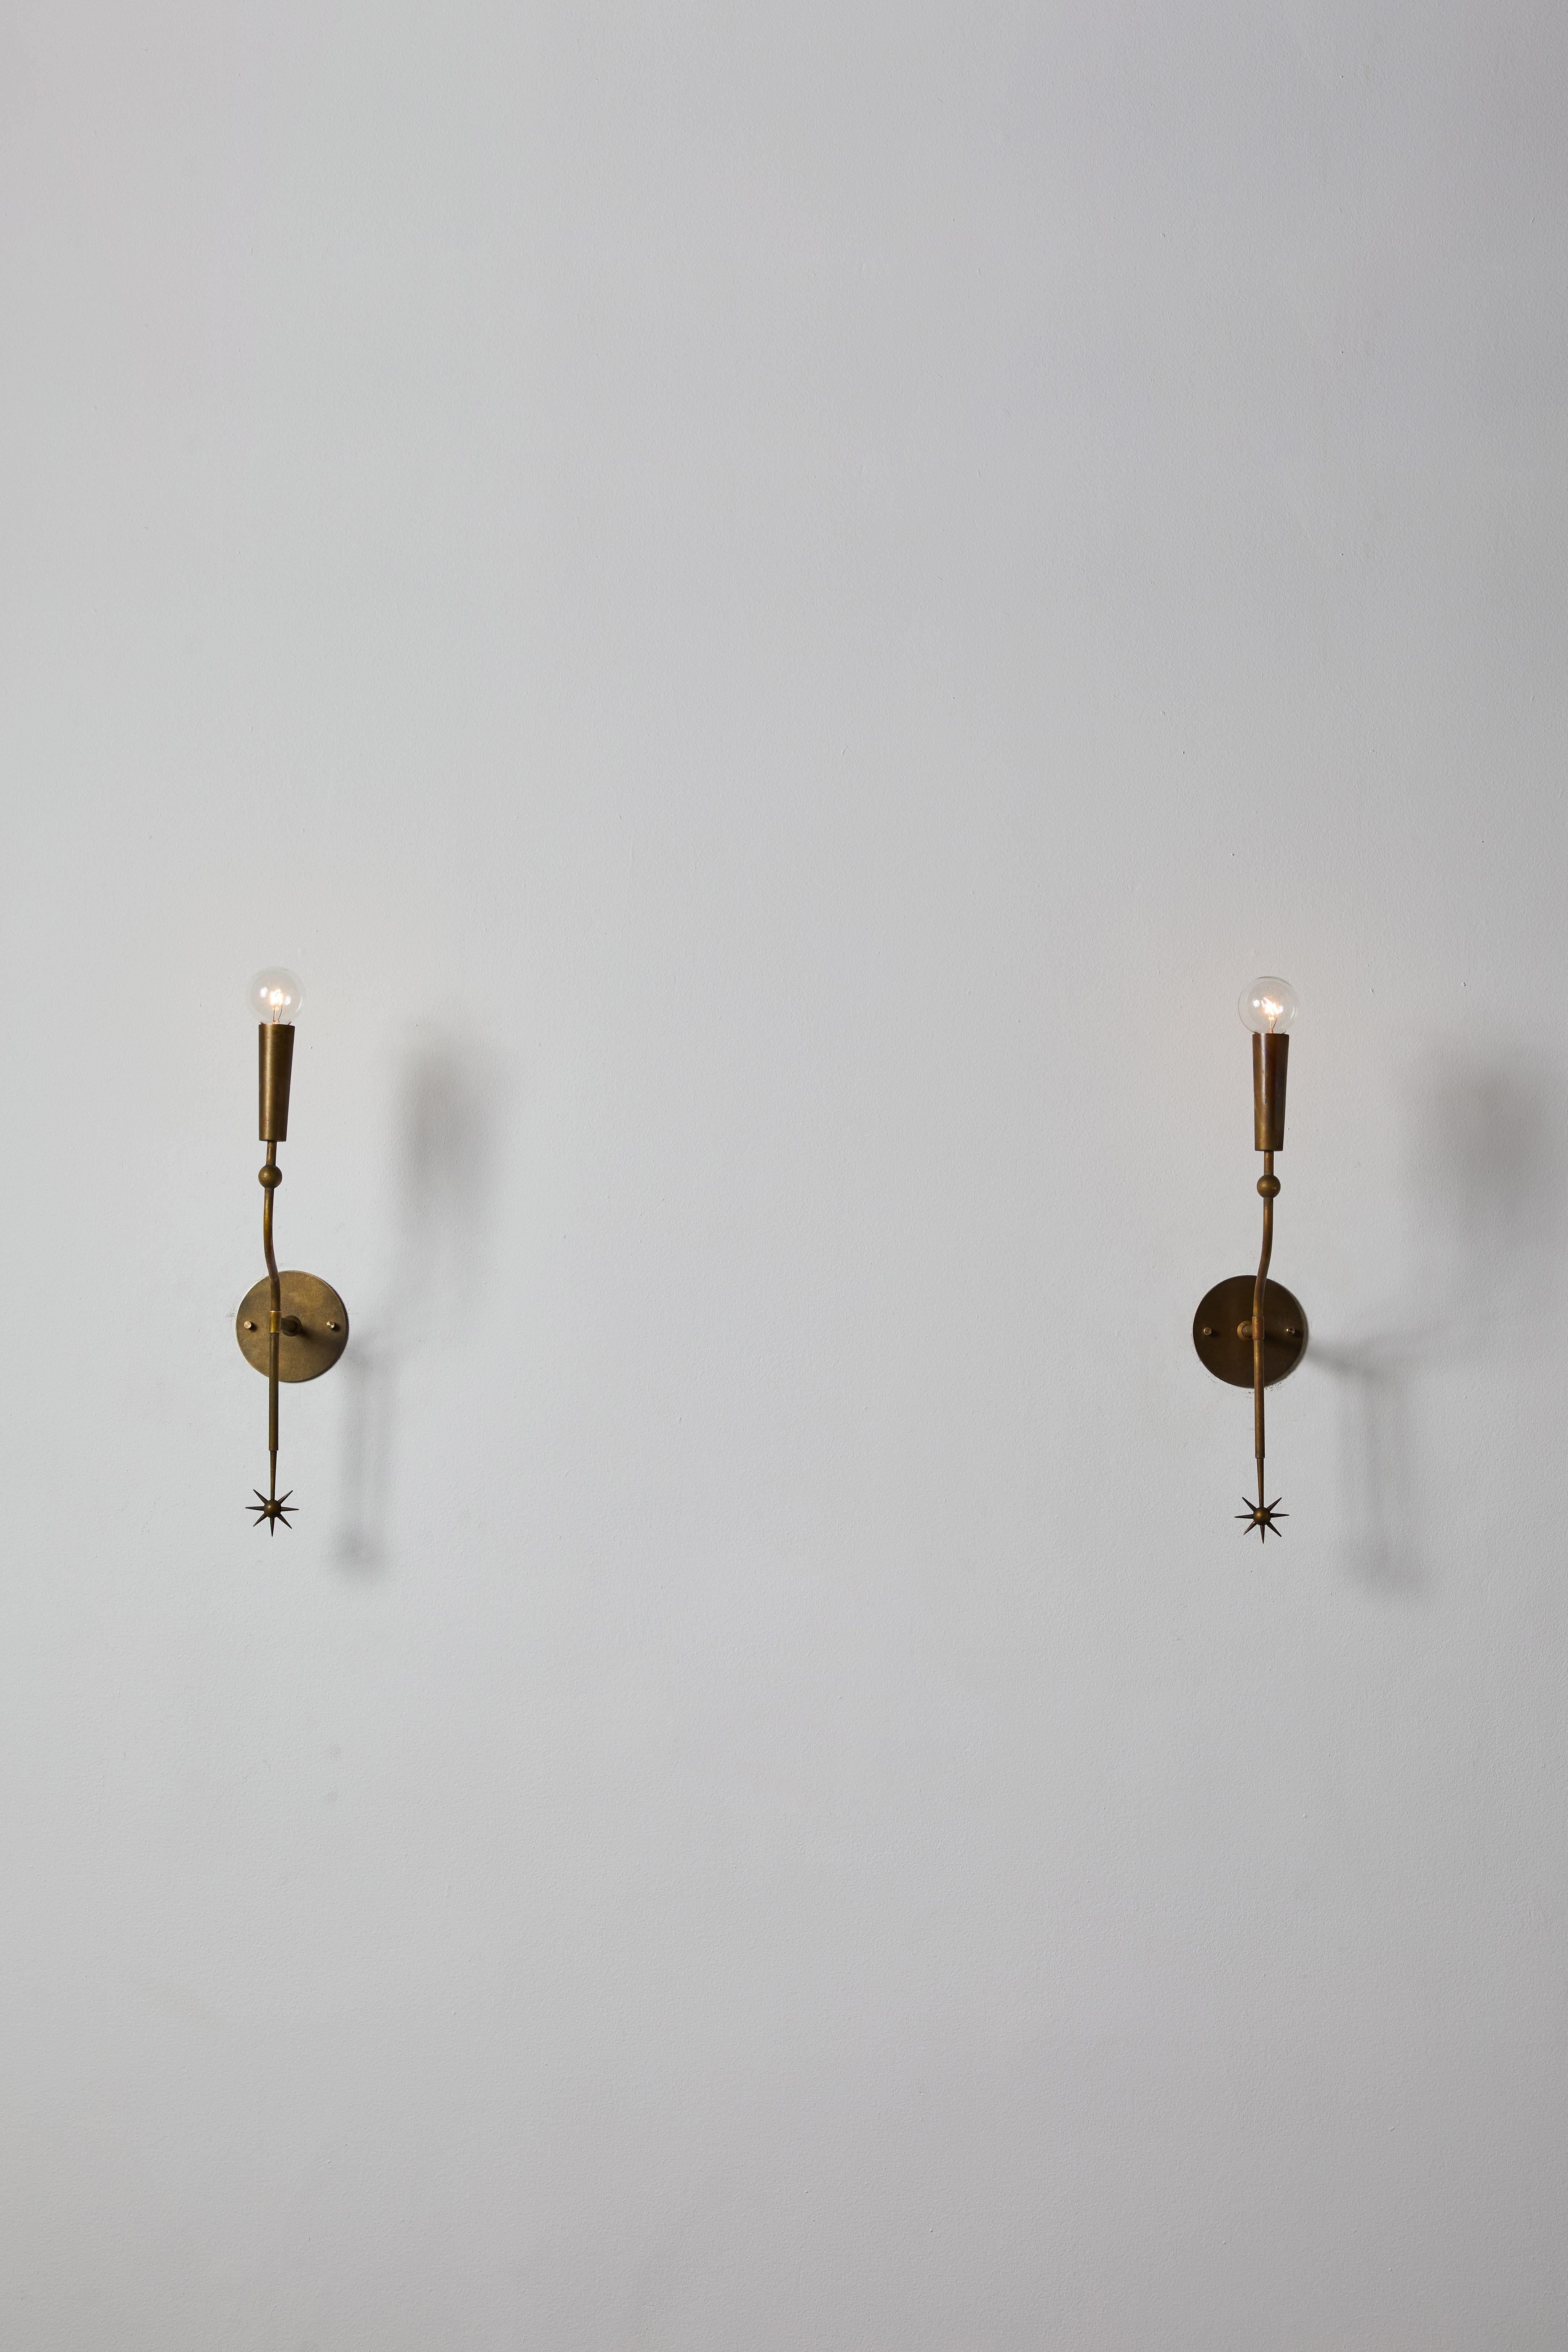 Pair of sconces by Stilnovo. Manufactured in Italy, circa 1950s. Brass, custom brass backplate. Rewired for U.S. standards. We recommend one E14 European 60w maximum candelabra bulb per sconce. Bulbs provided as a one time courtesy.